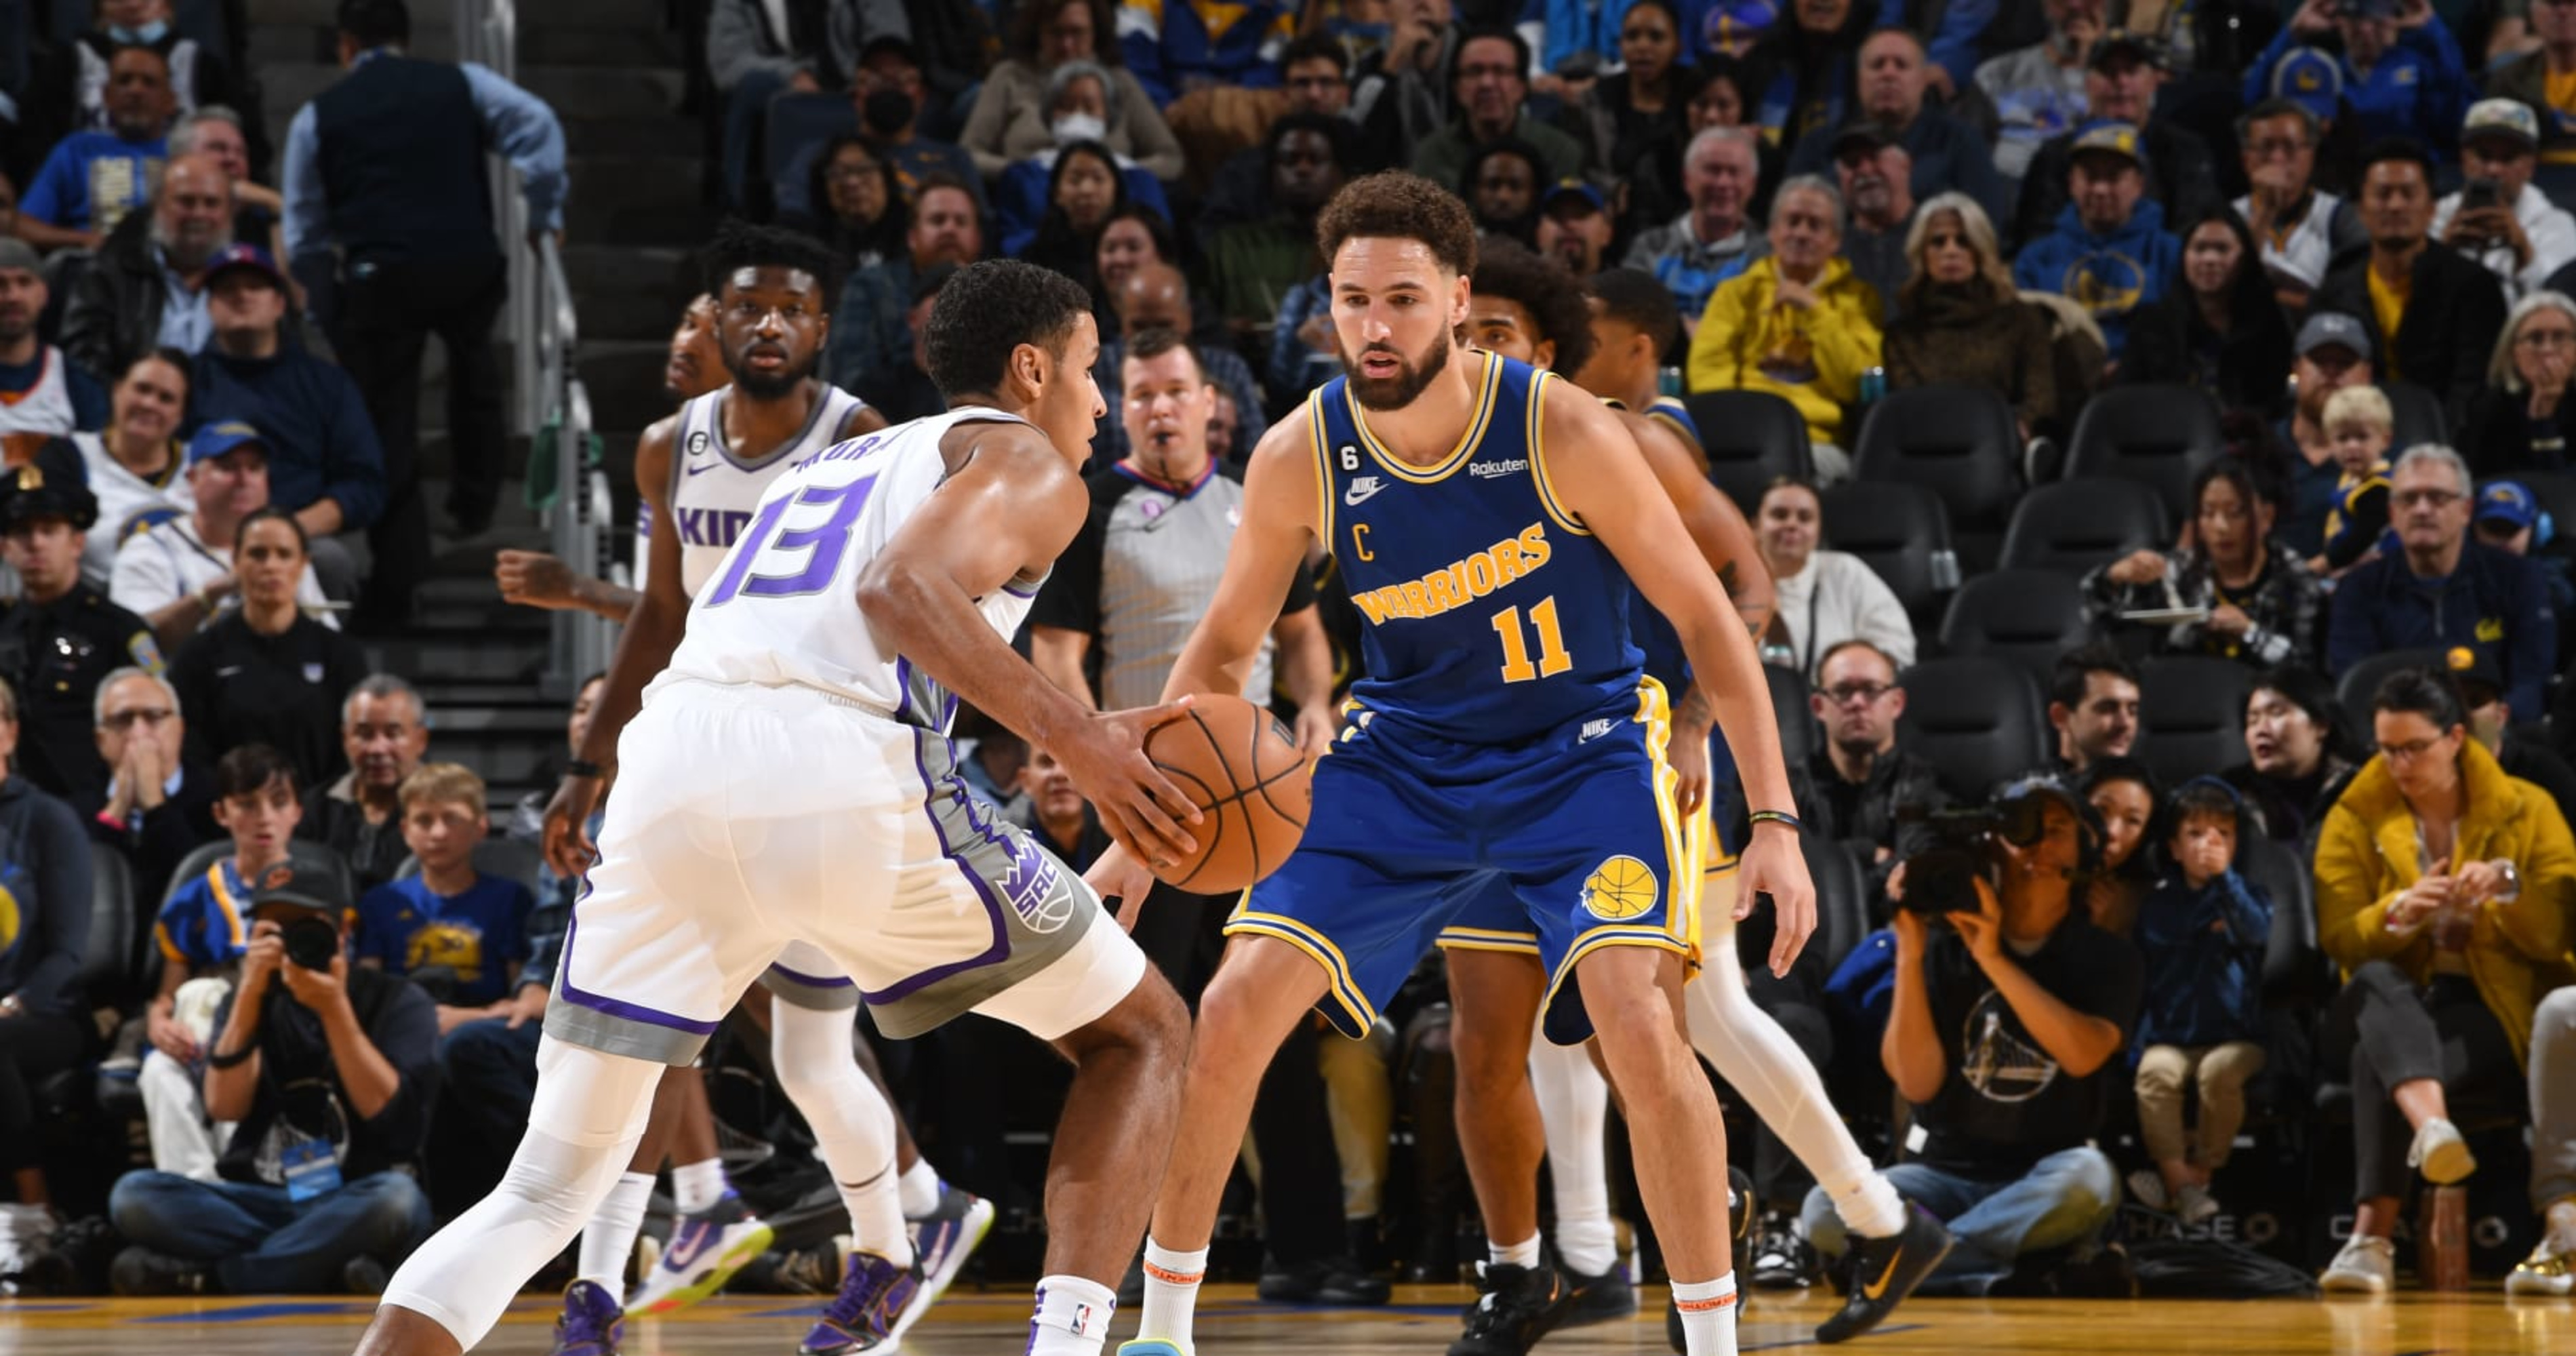 Klay Thompson Fouled Kevin Huerter at End of Kings-Warriors, NBA L2M Report Says